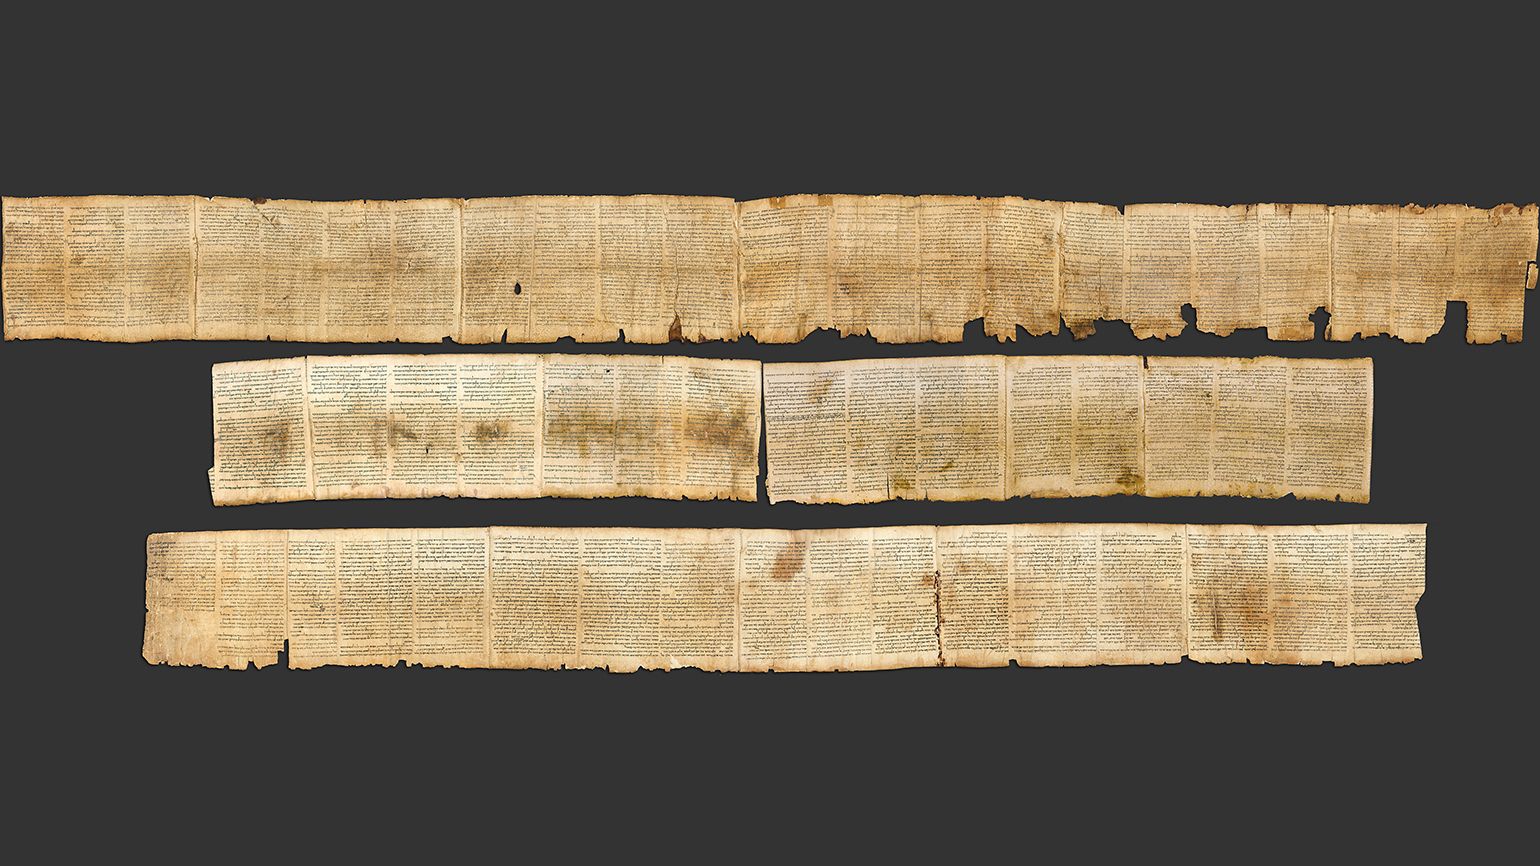 Photographic reproduction of the Great Isaiah Scroll, the best preserved of the biblical scrolls found at Qumran